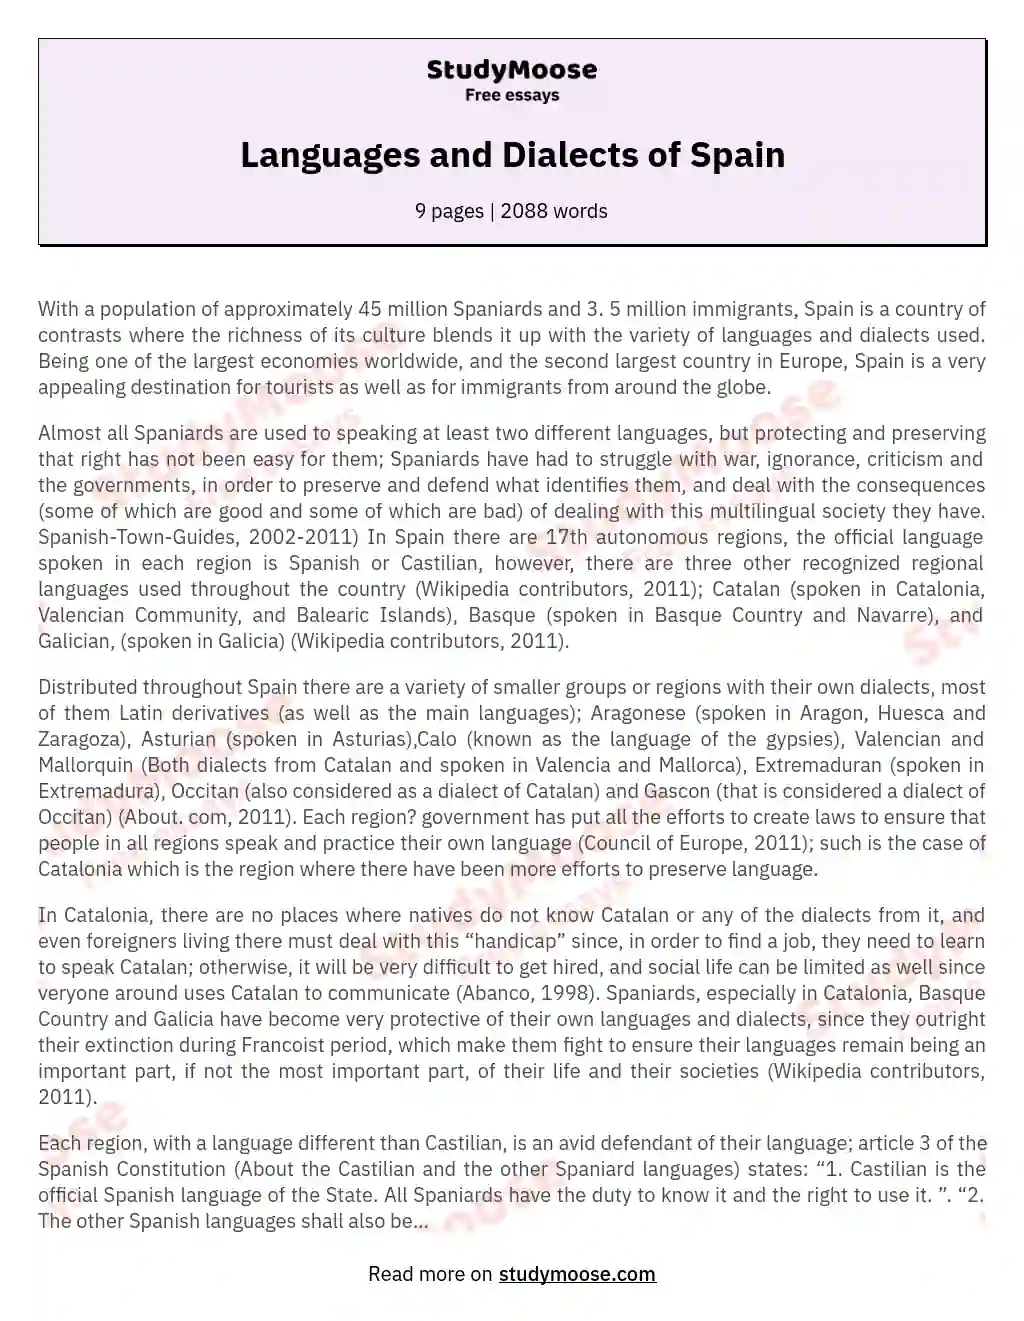 Languages and Dialects of Spain